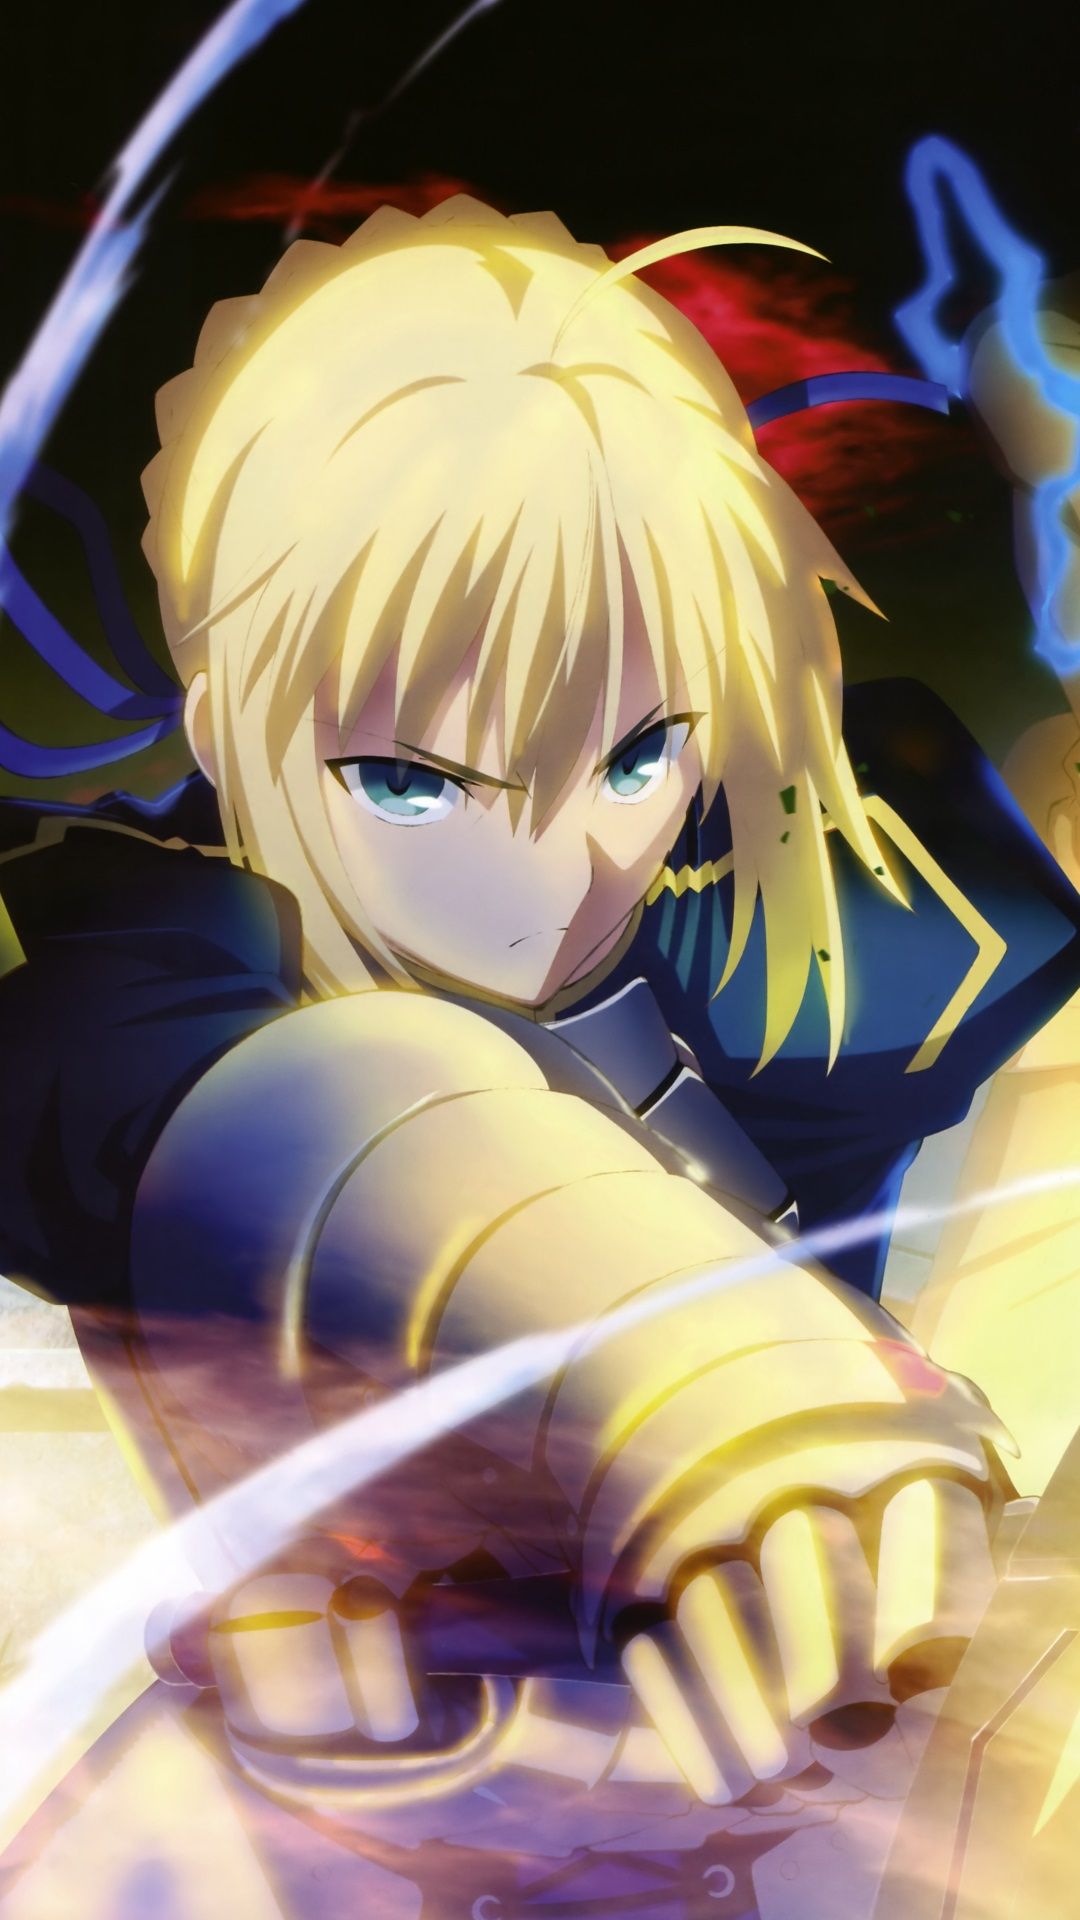 Fate Stay Night Unlimited Blade Works Saber.Samsung Galaxy S4 wallpaper 1080×1920